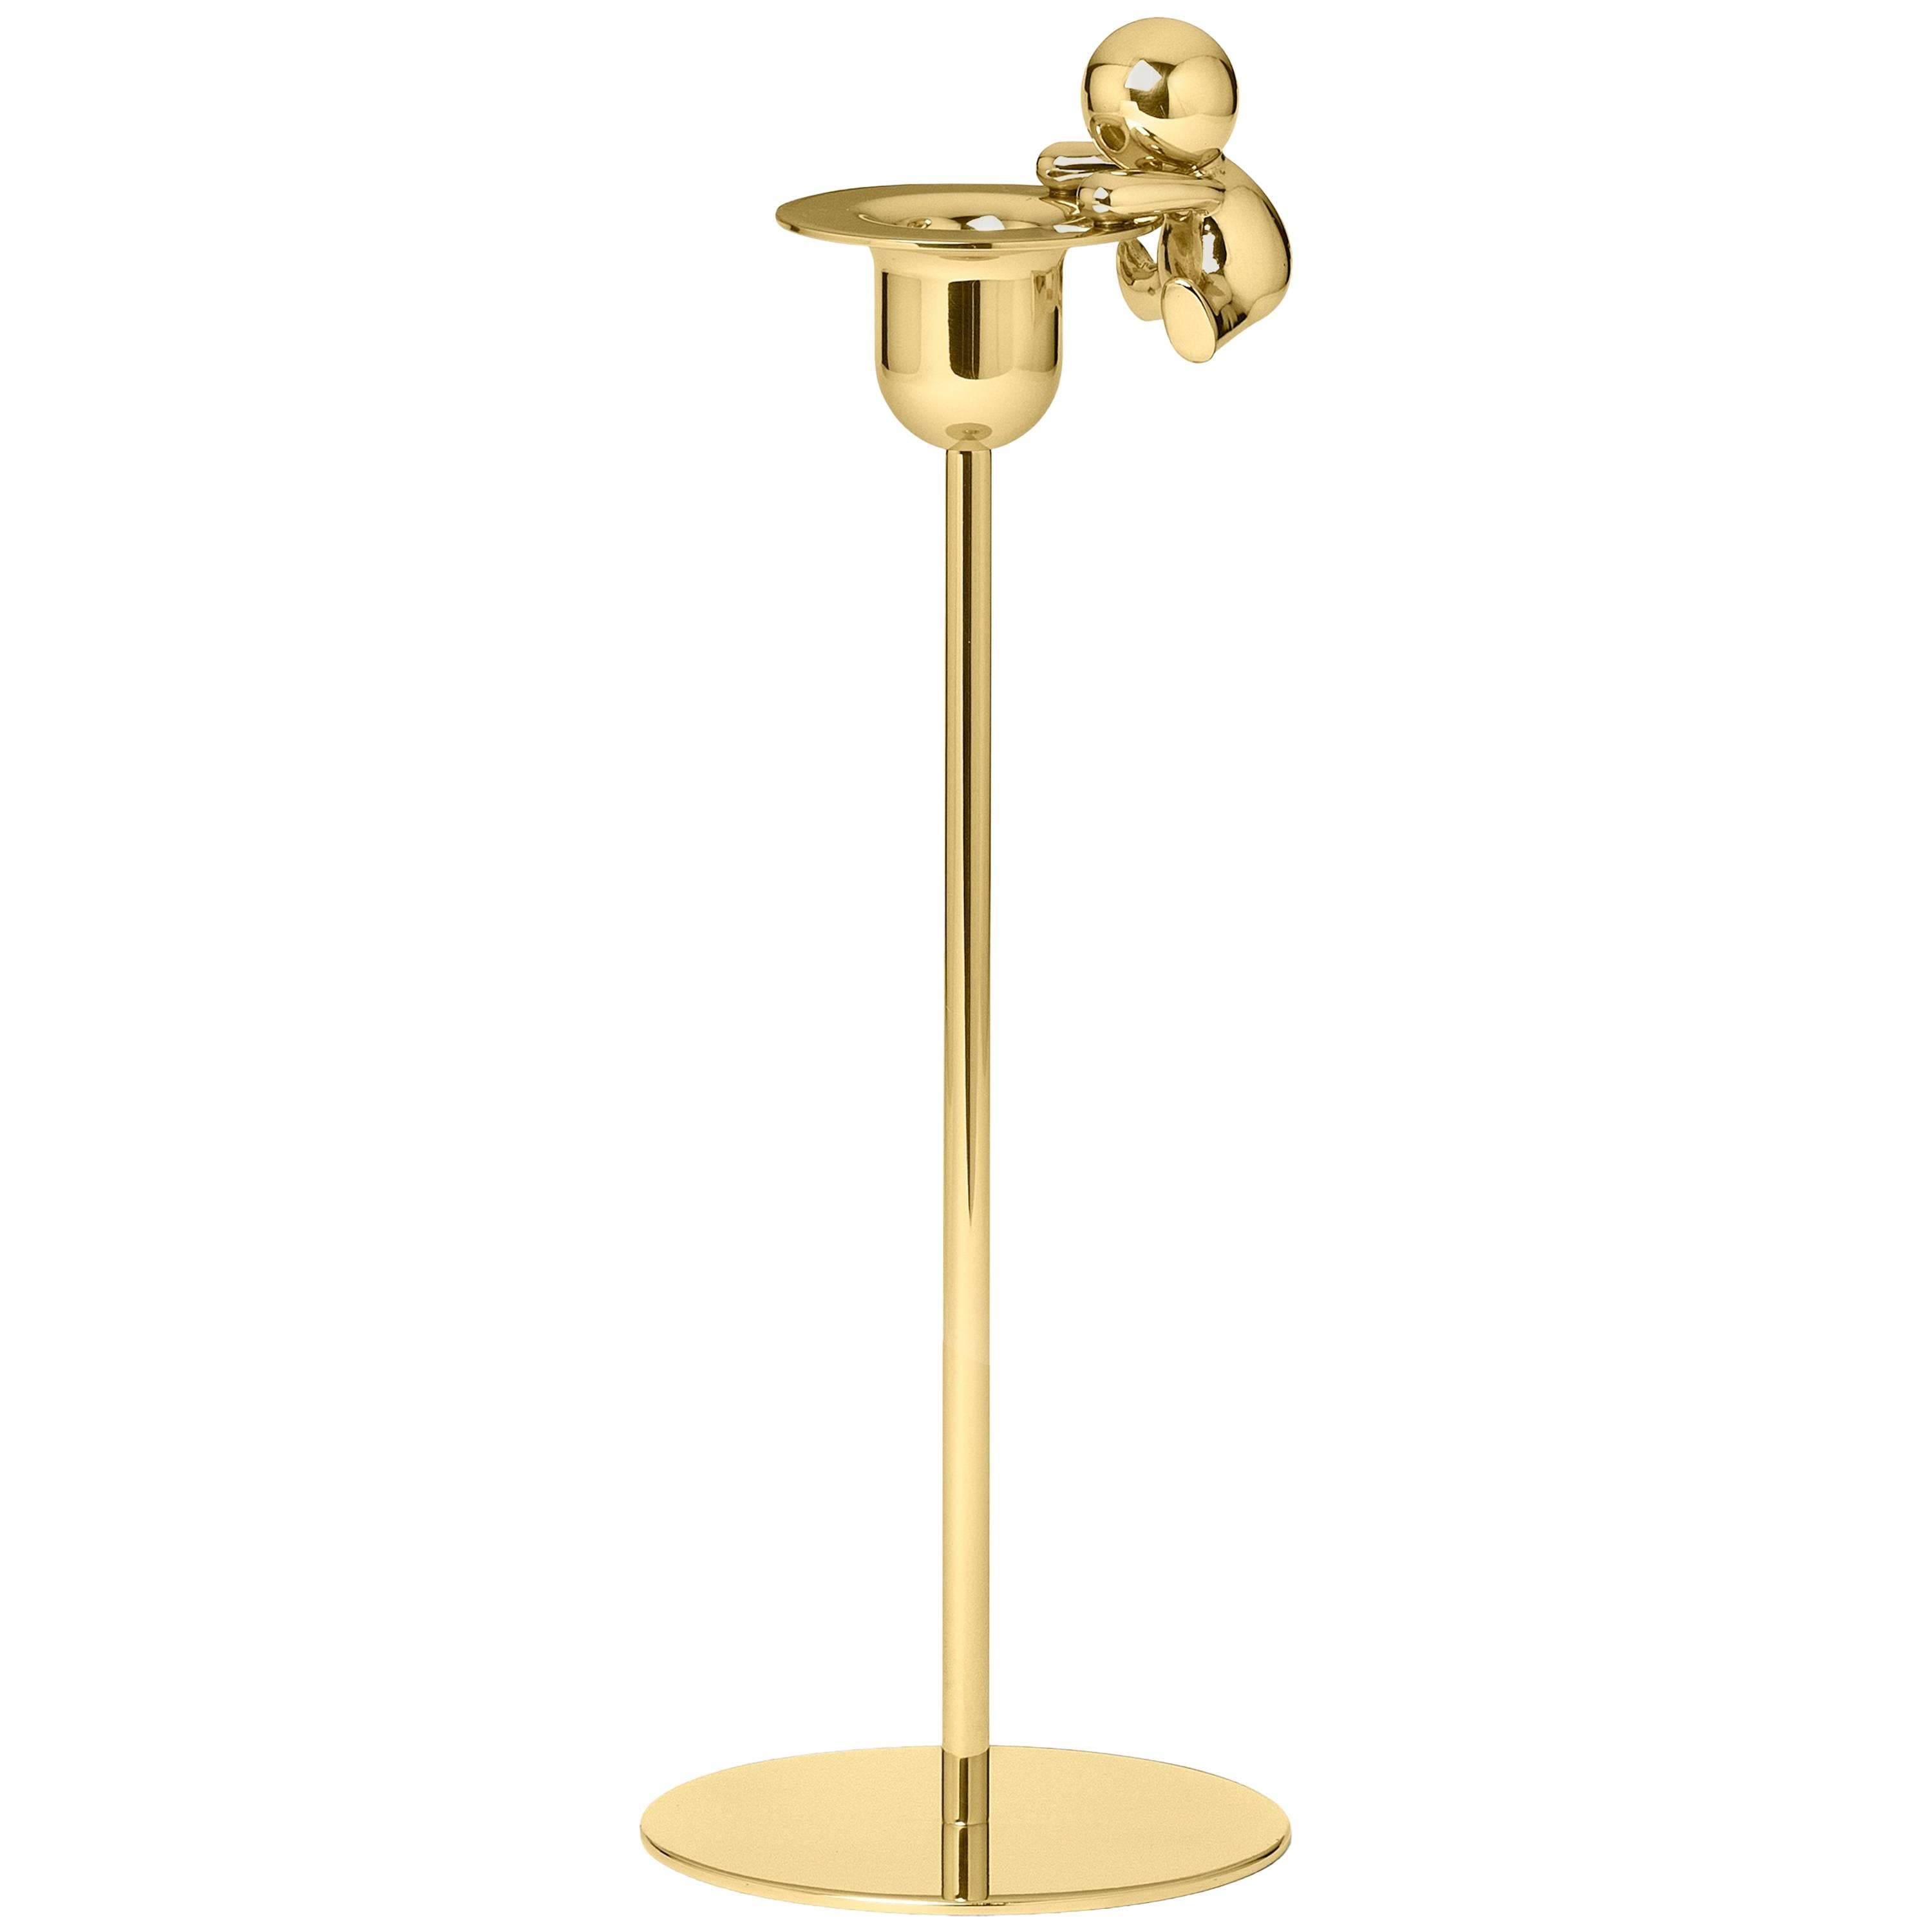 Ghidini 1961 Omini the Climber Tall Candlestick in Polished Brass For Sale